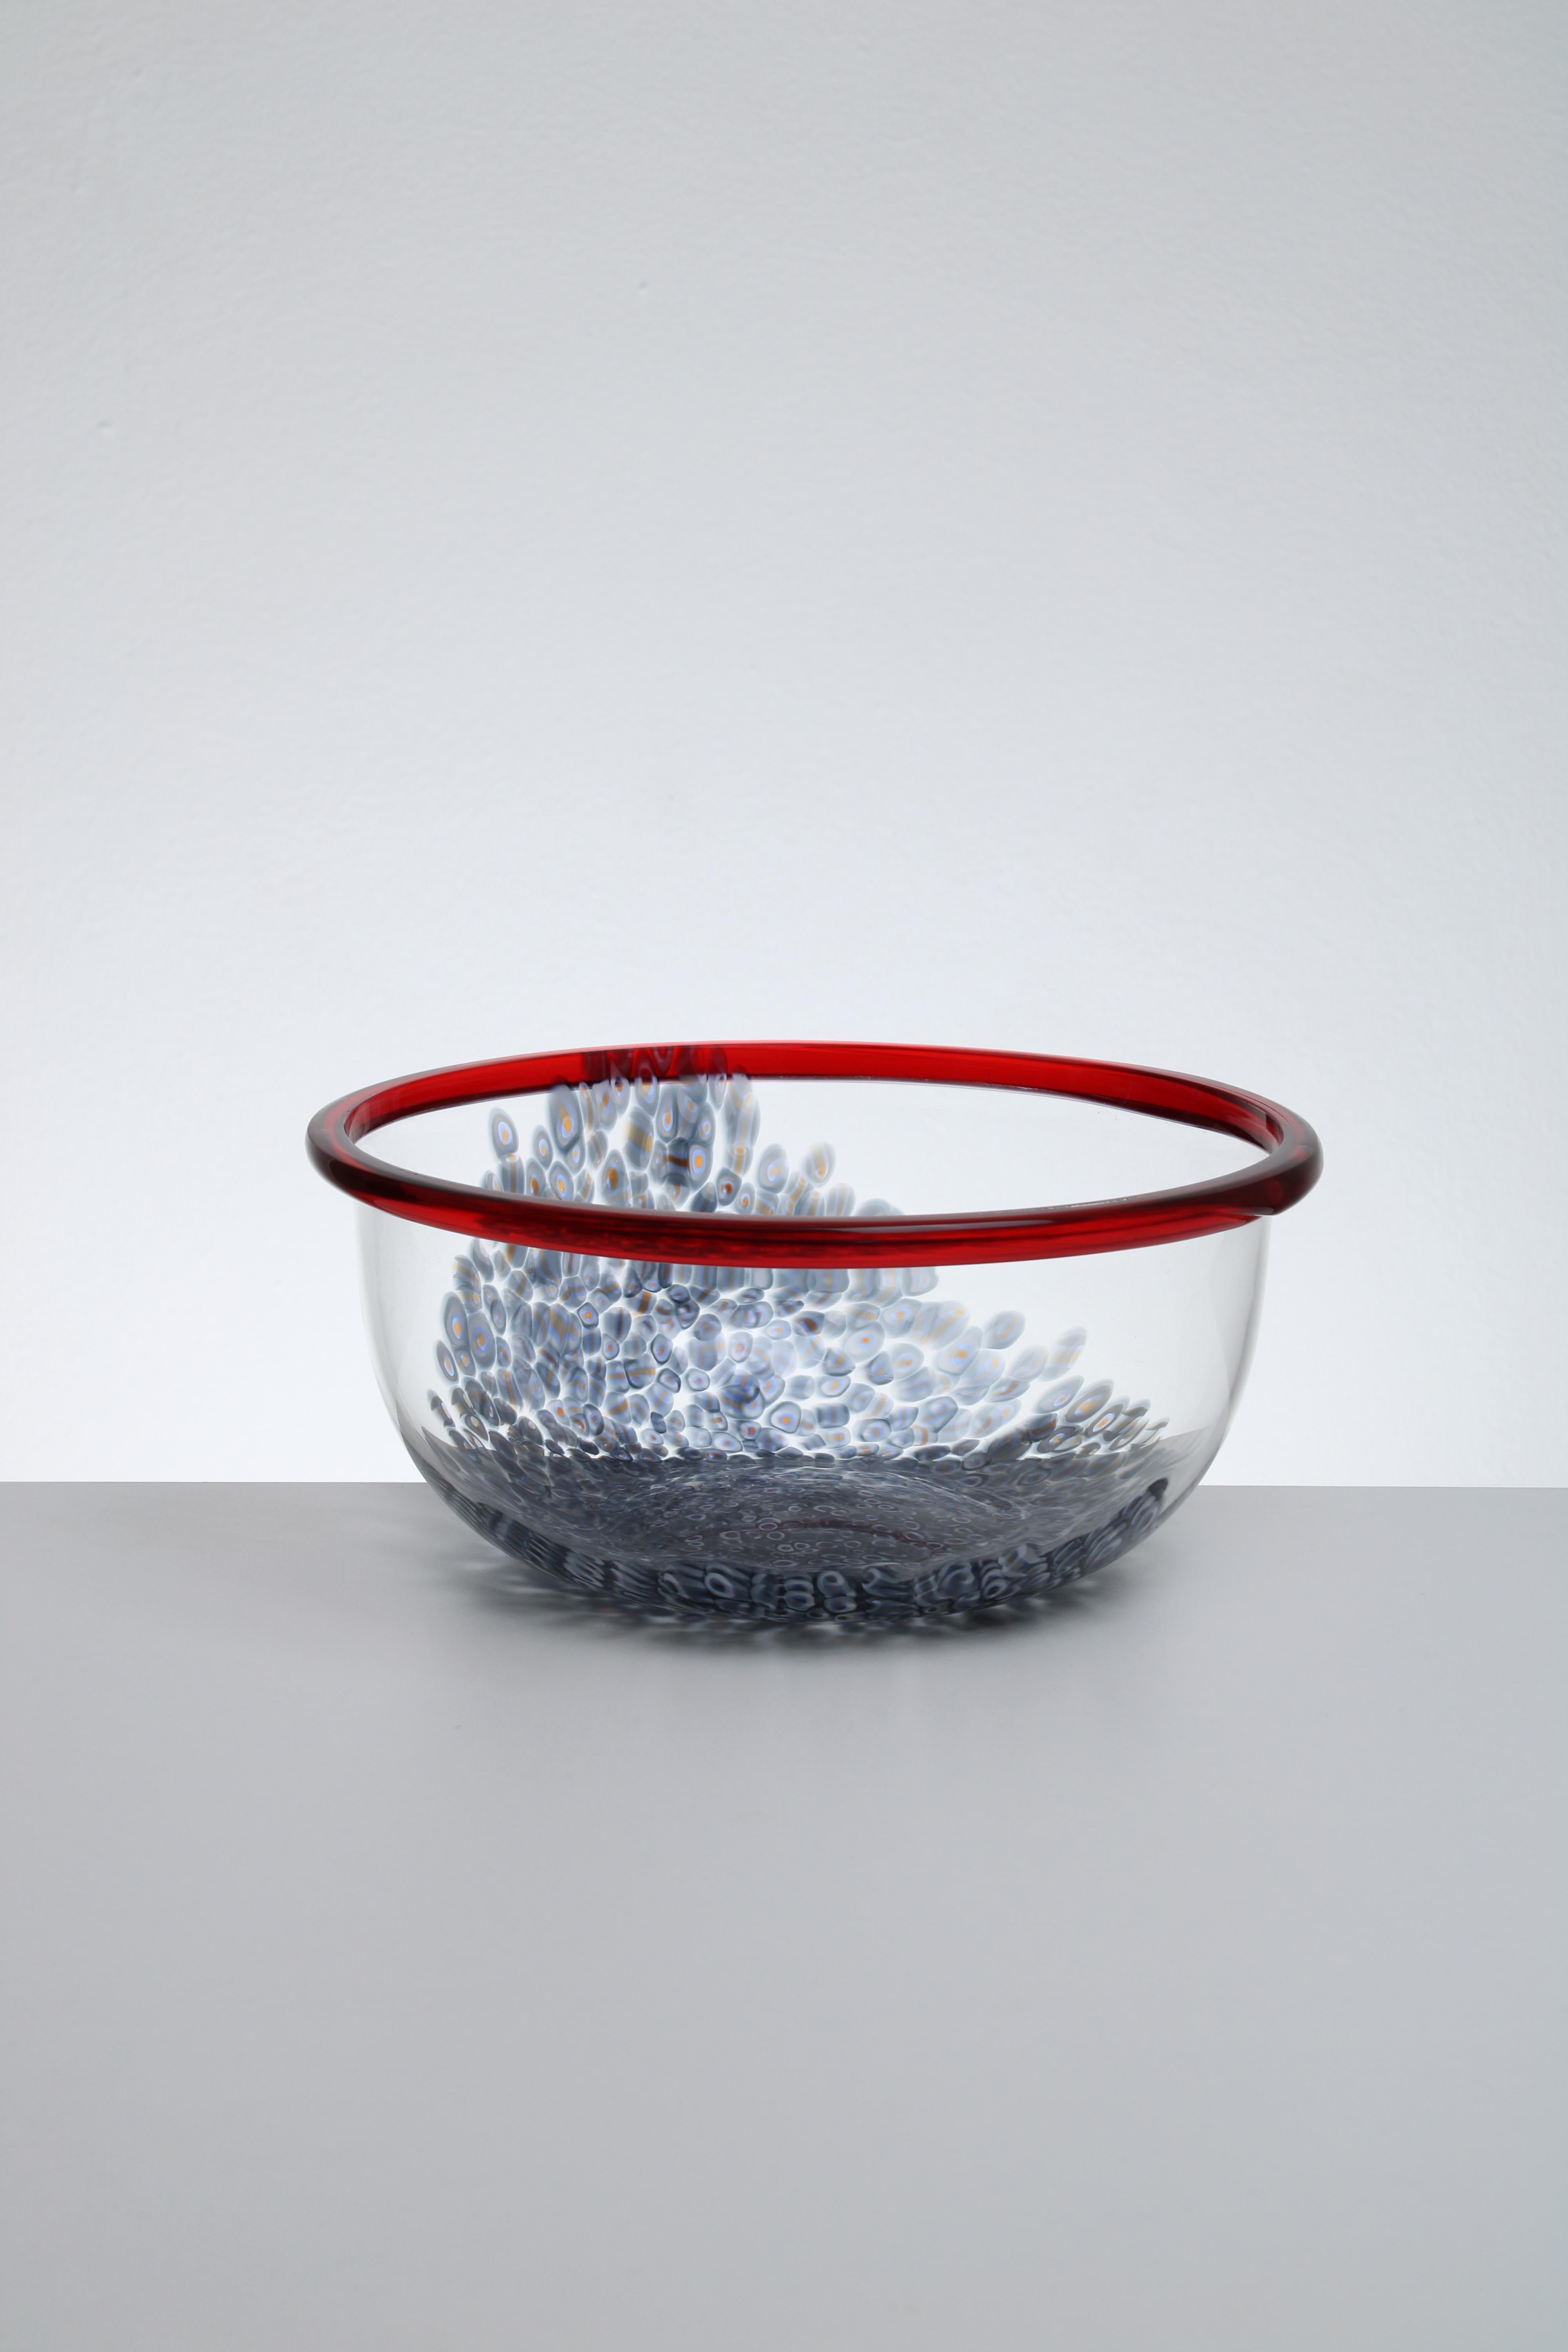 Murano glass bowl from the Neverrino series. Designed by Luciano Vistosi. This bowl is made by one of the most well-known glassmakers in Italy. Vistosi is a glass-works producer who make their glass on the island Murano, next to Venice. All of their